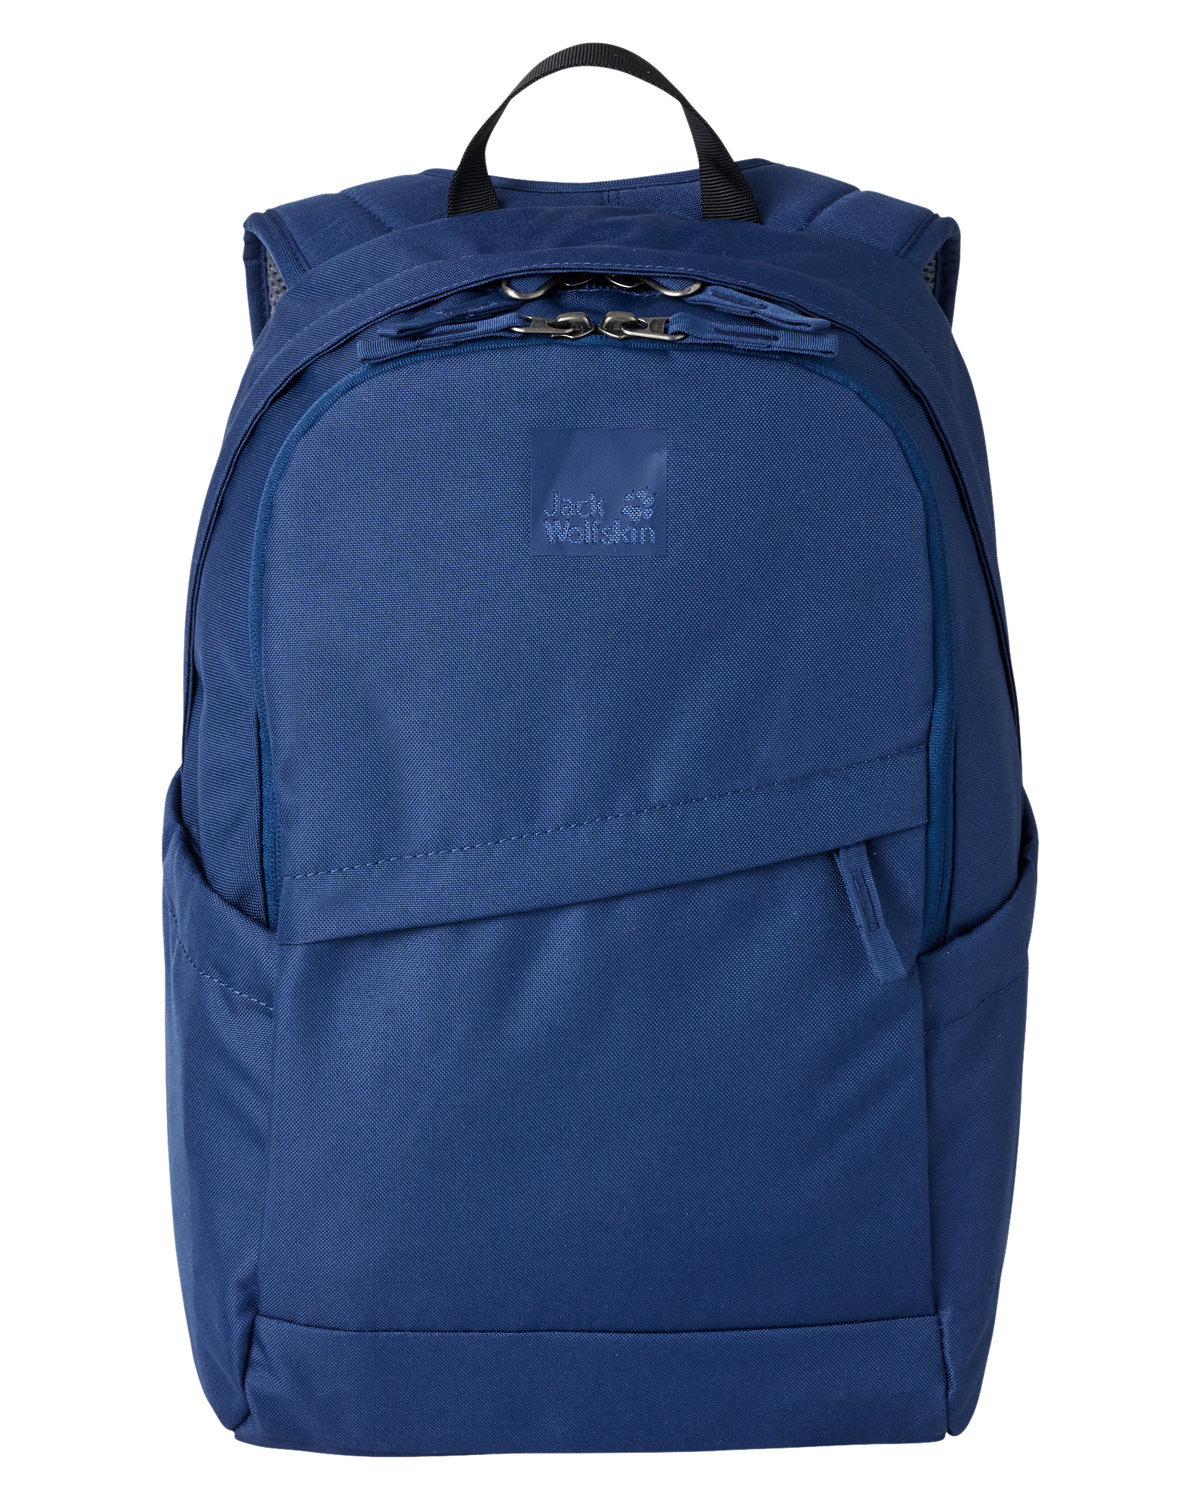 Jack Wolfskin 2007682 - Perfect Day Backpack